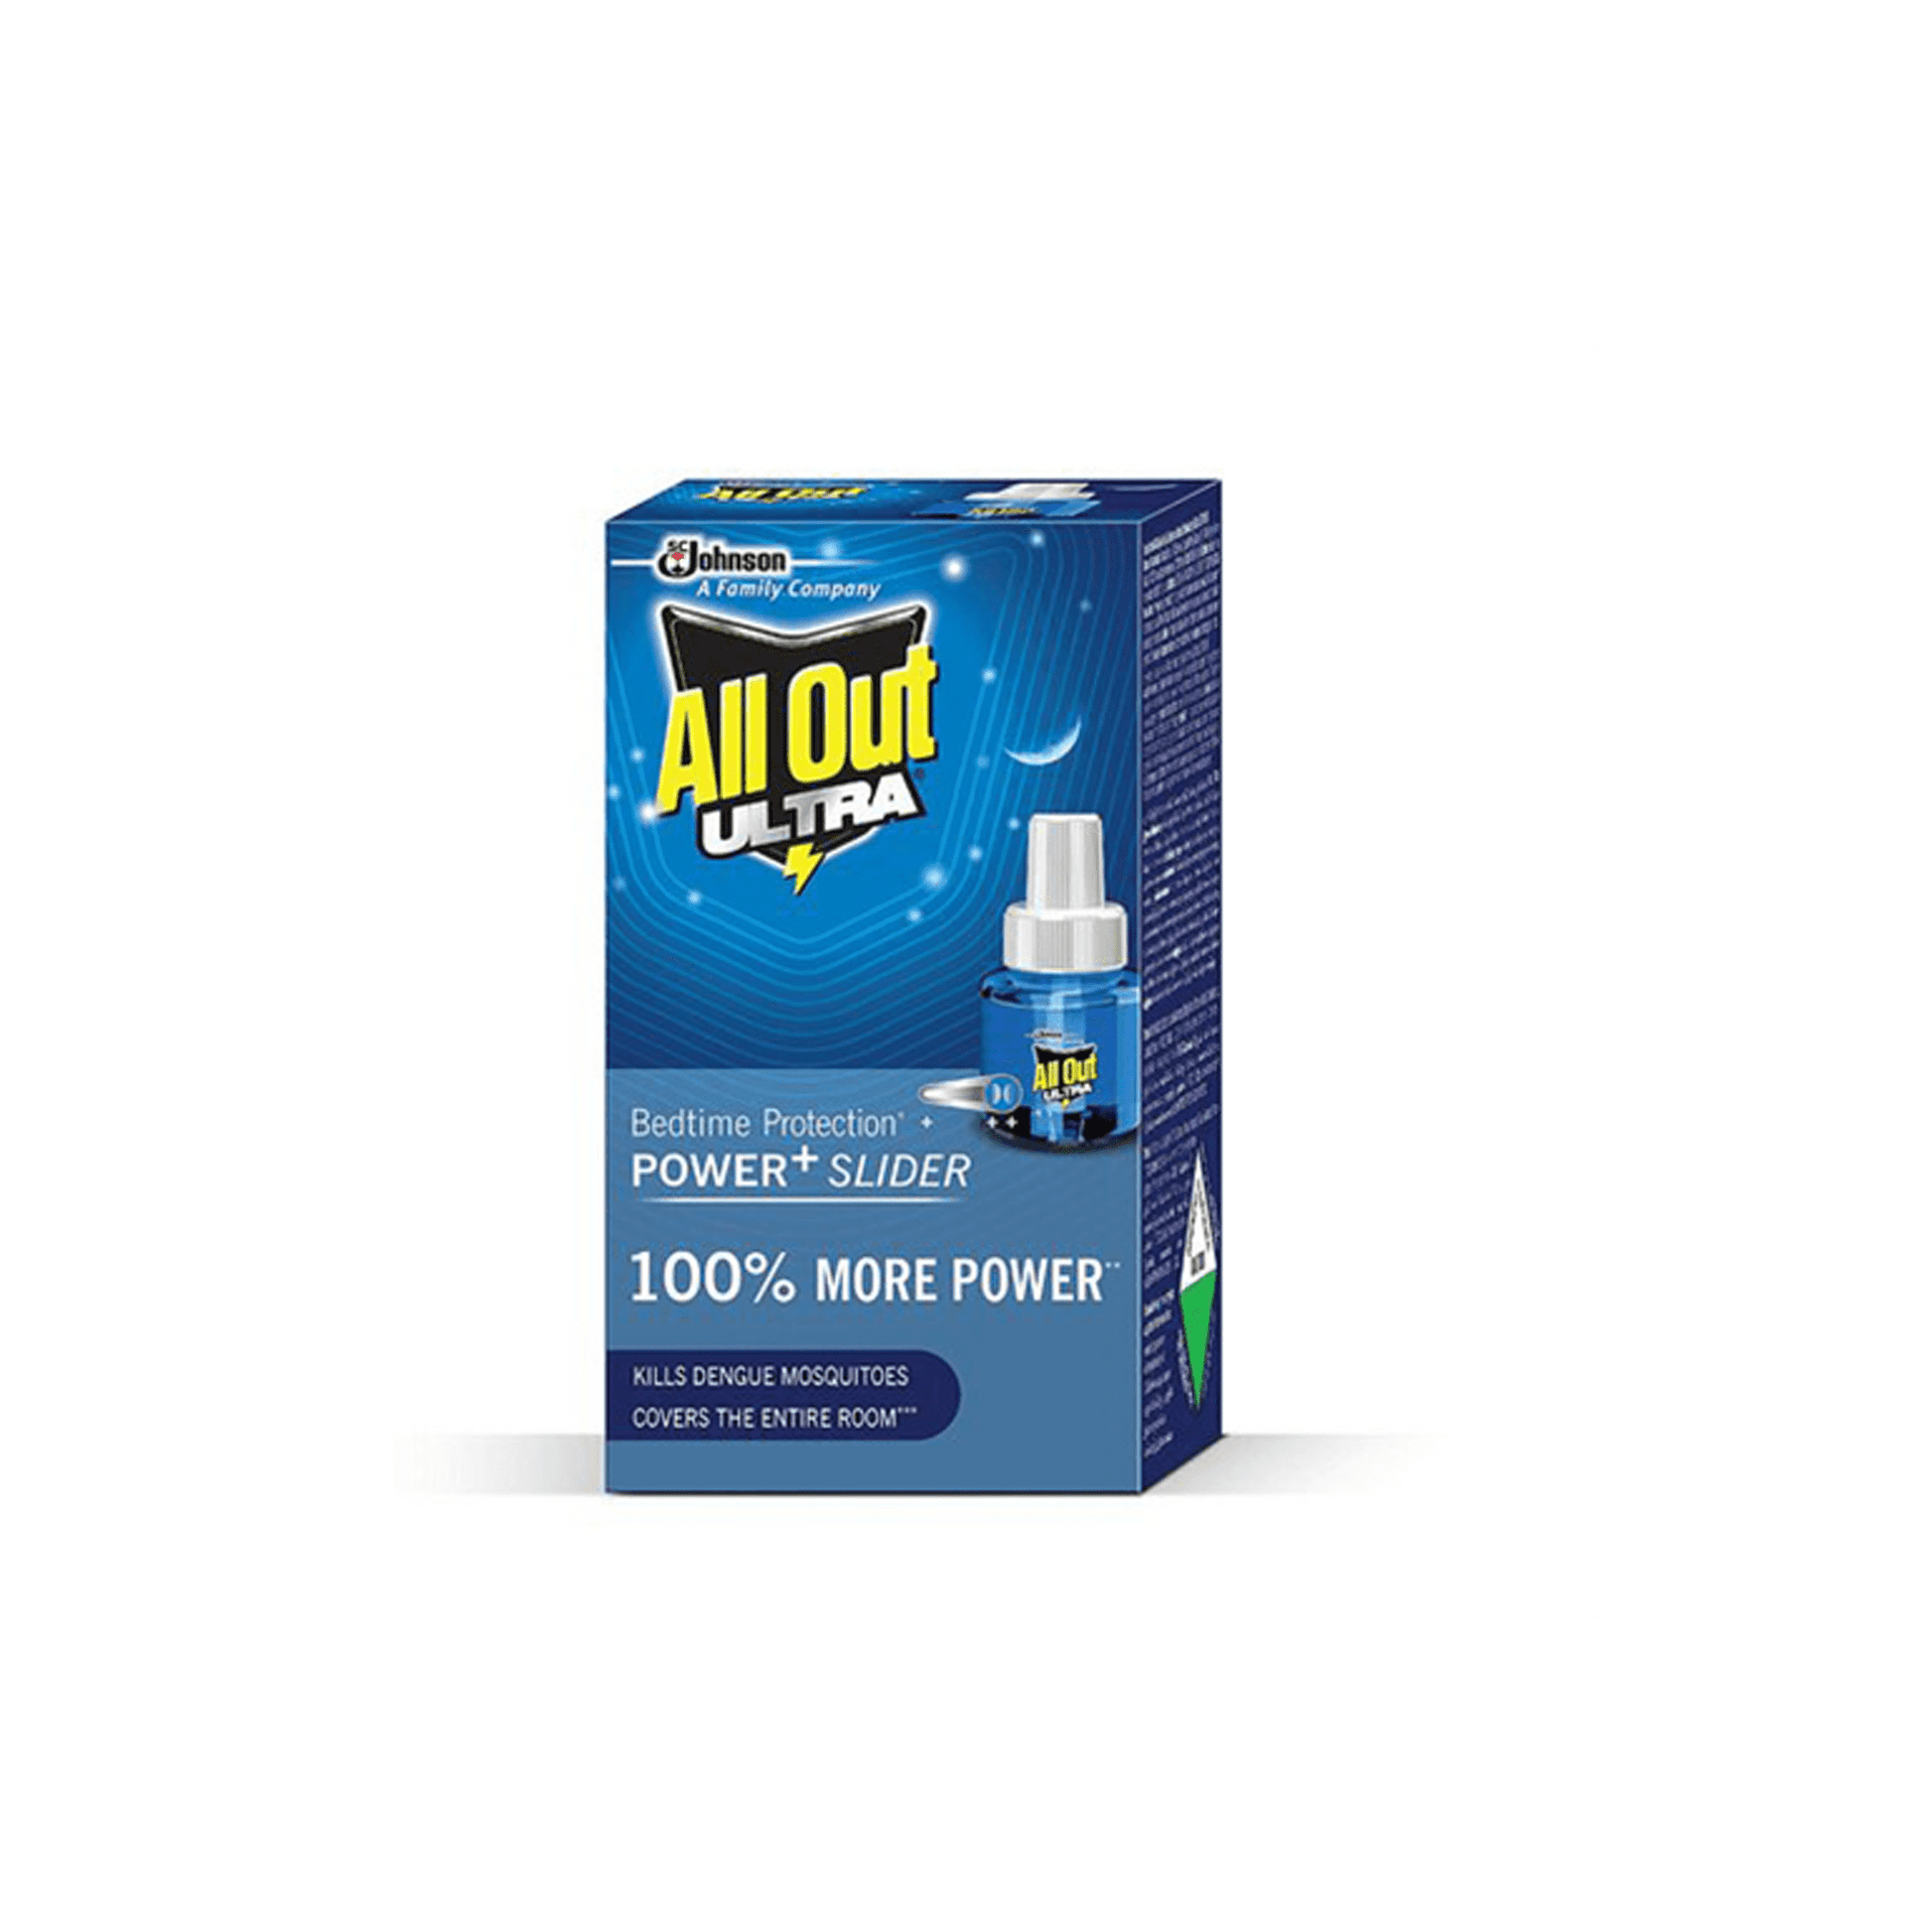 All Out Ultra Power+ Refill (Pack of 2).